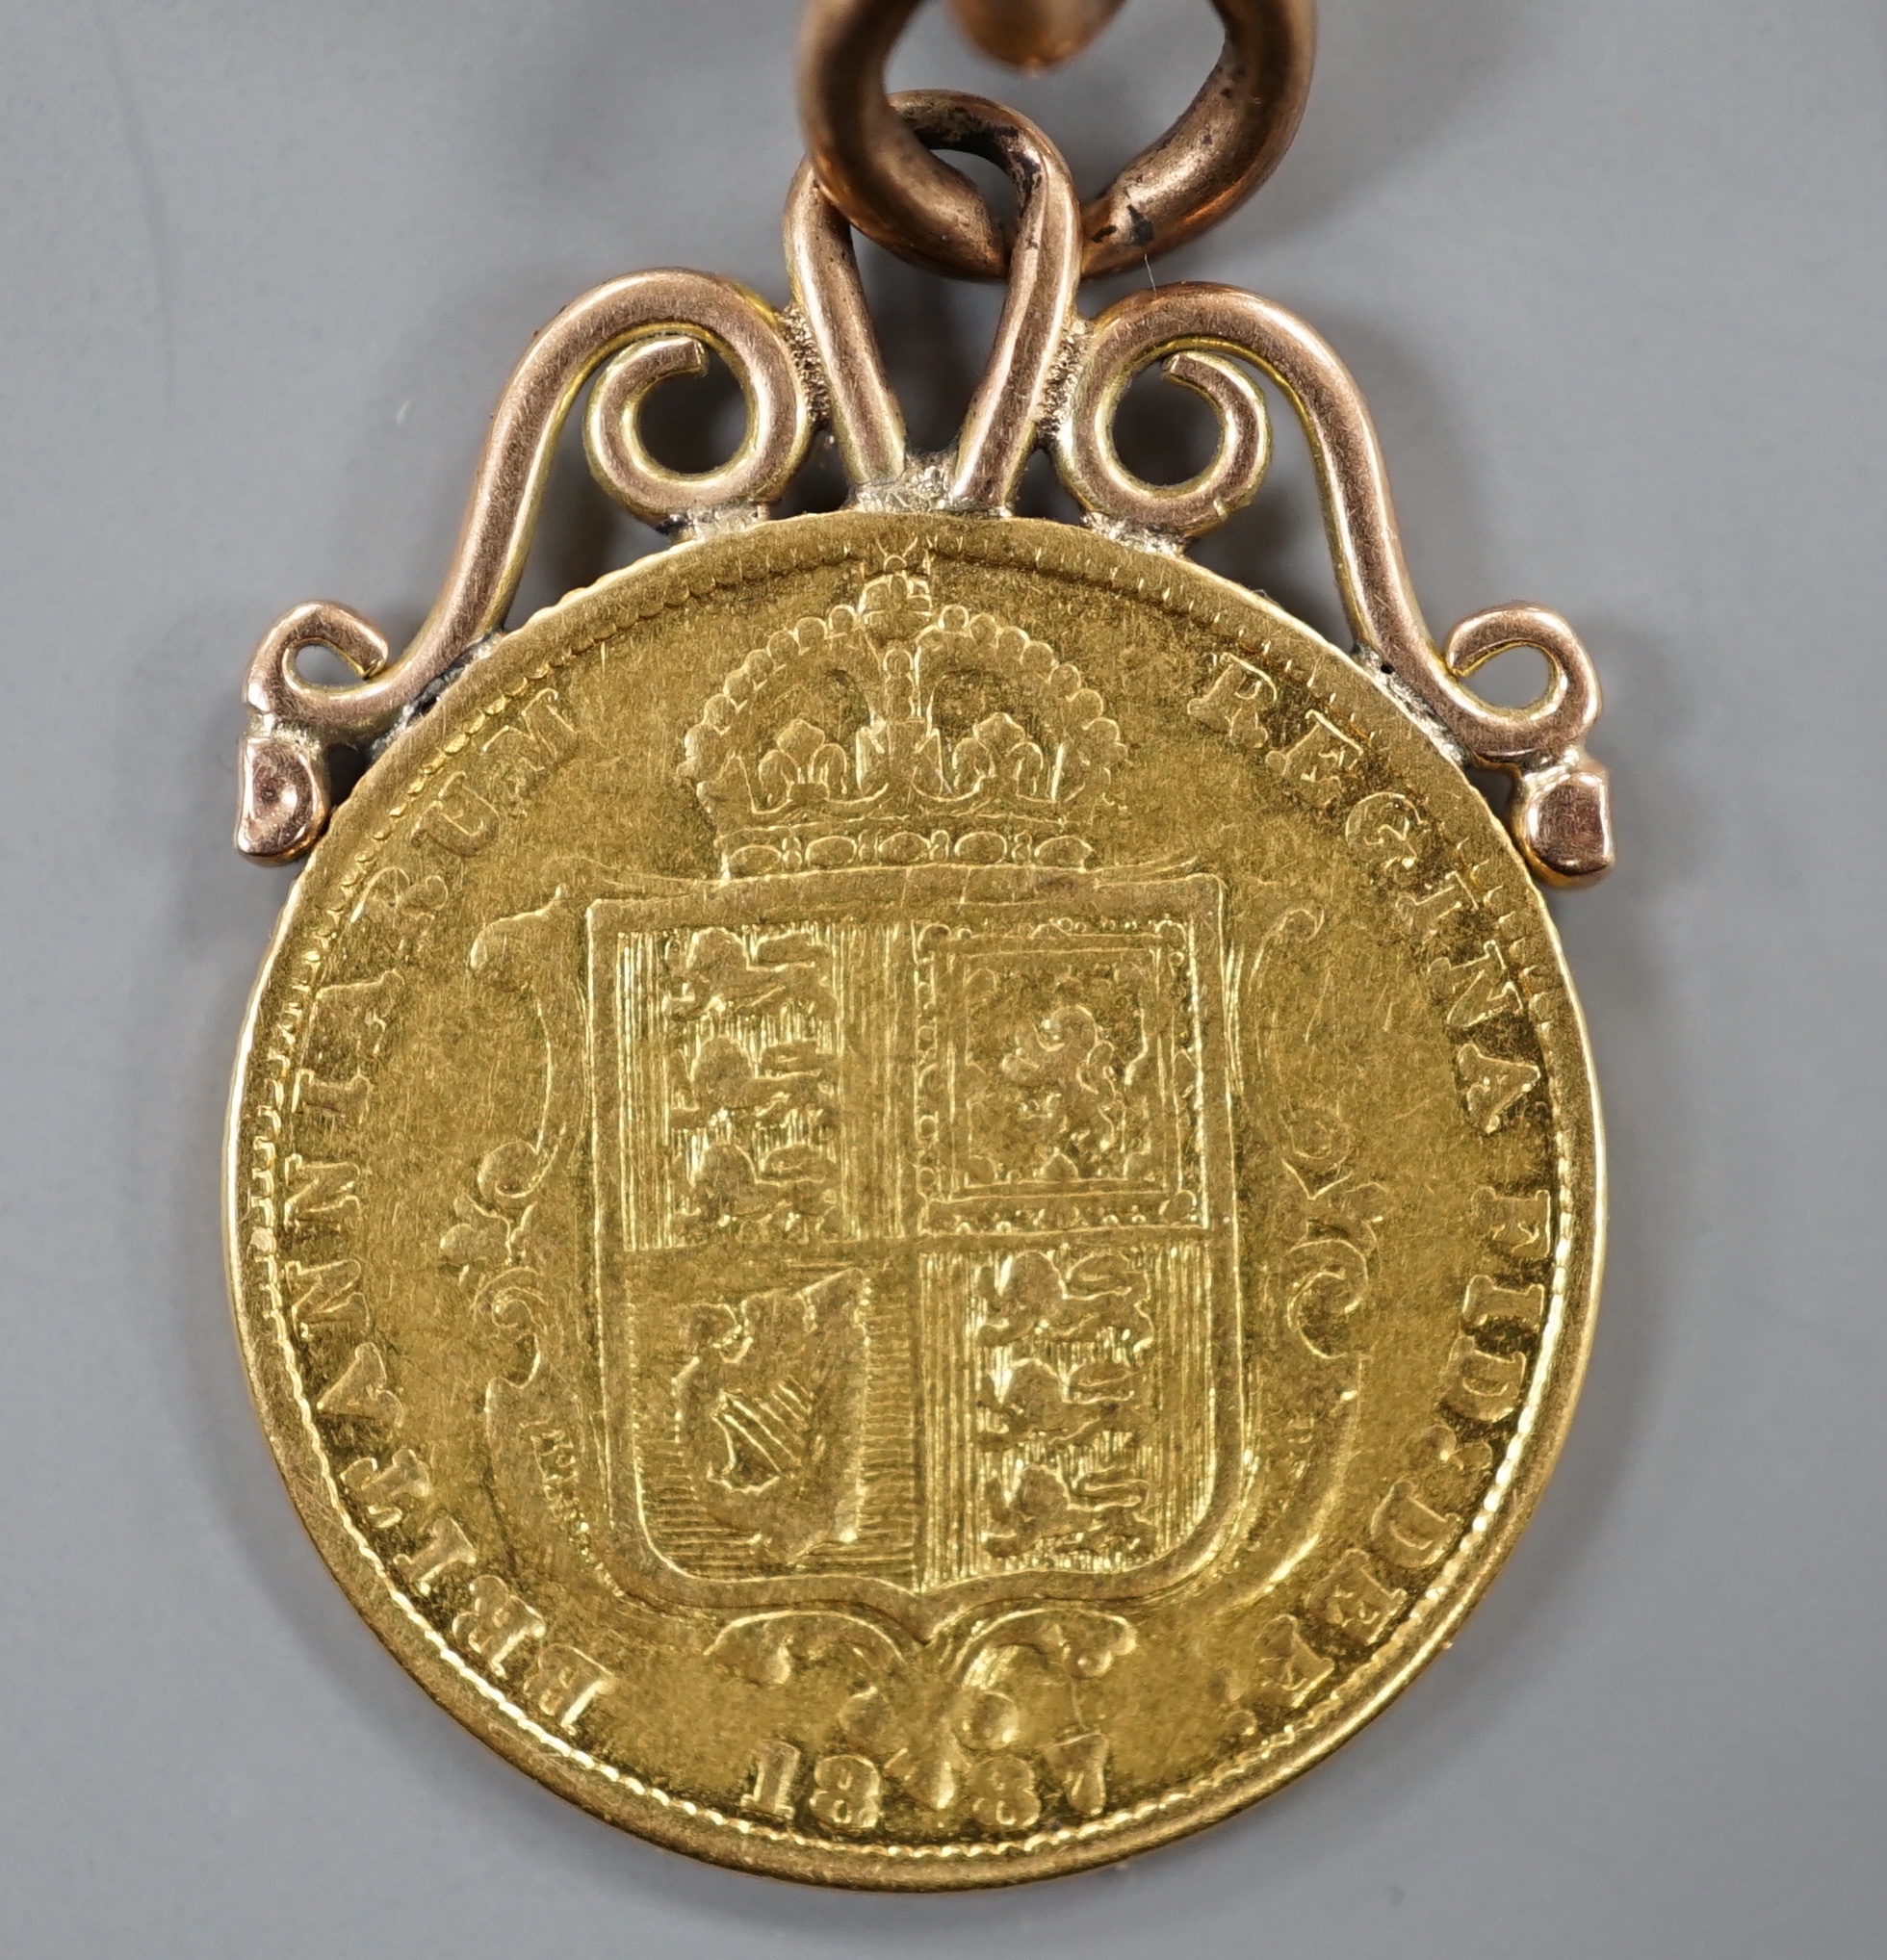 A Victoria 1887 half sovereign, now mounted on a 9ct gold fob with T-bar